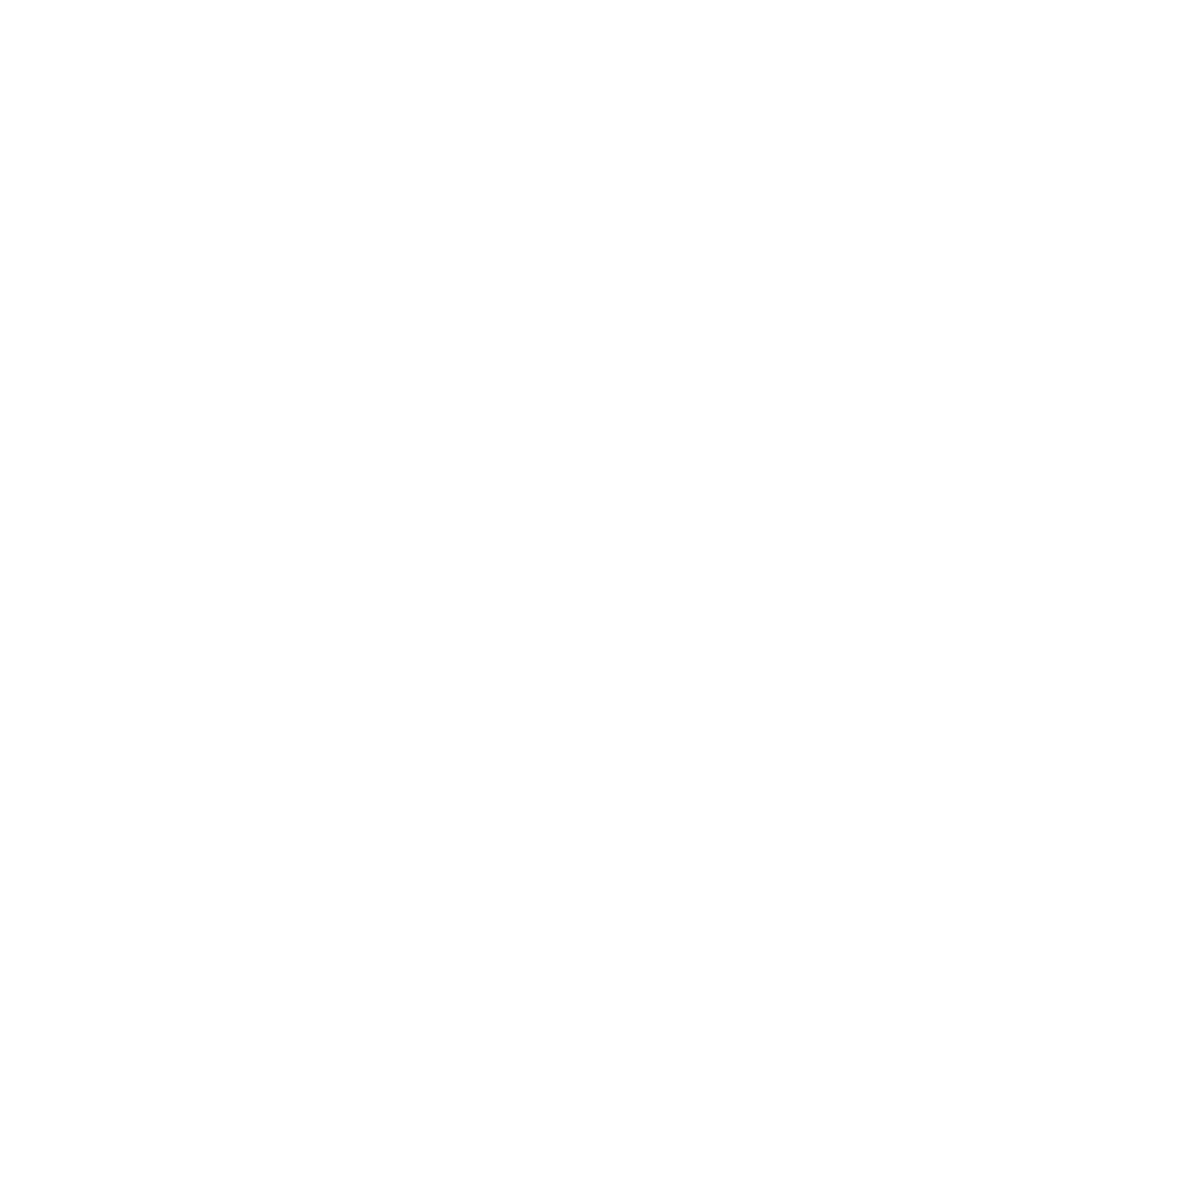 Certified Safe Feed Safe Food Facility